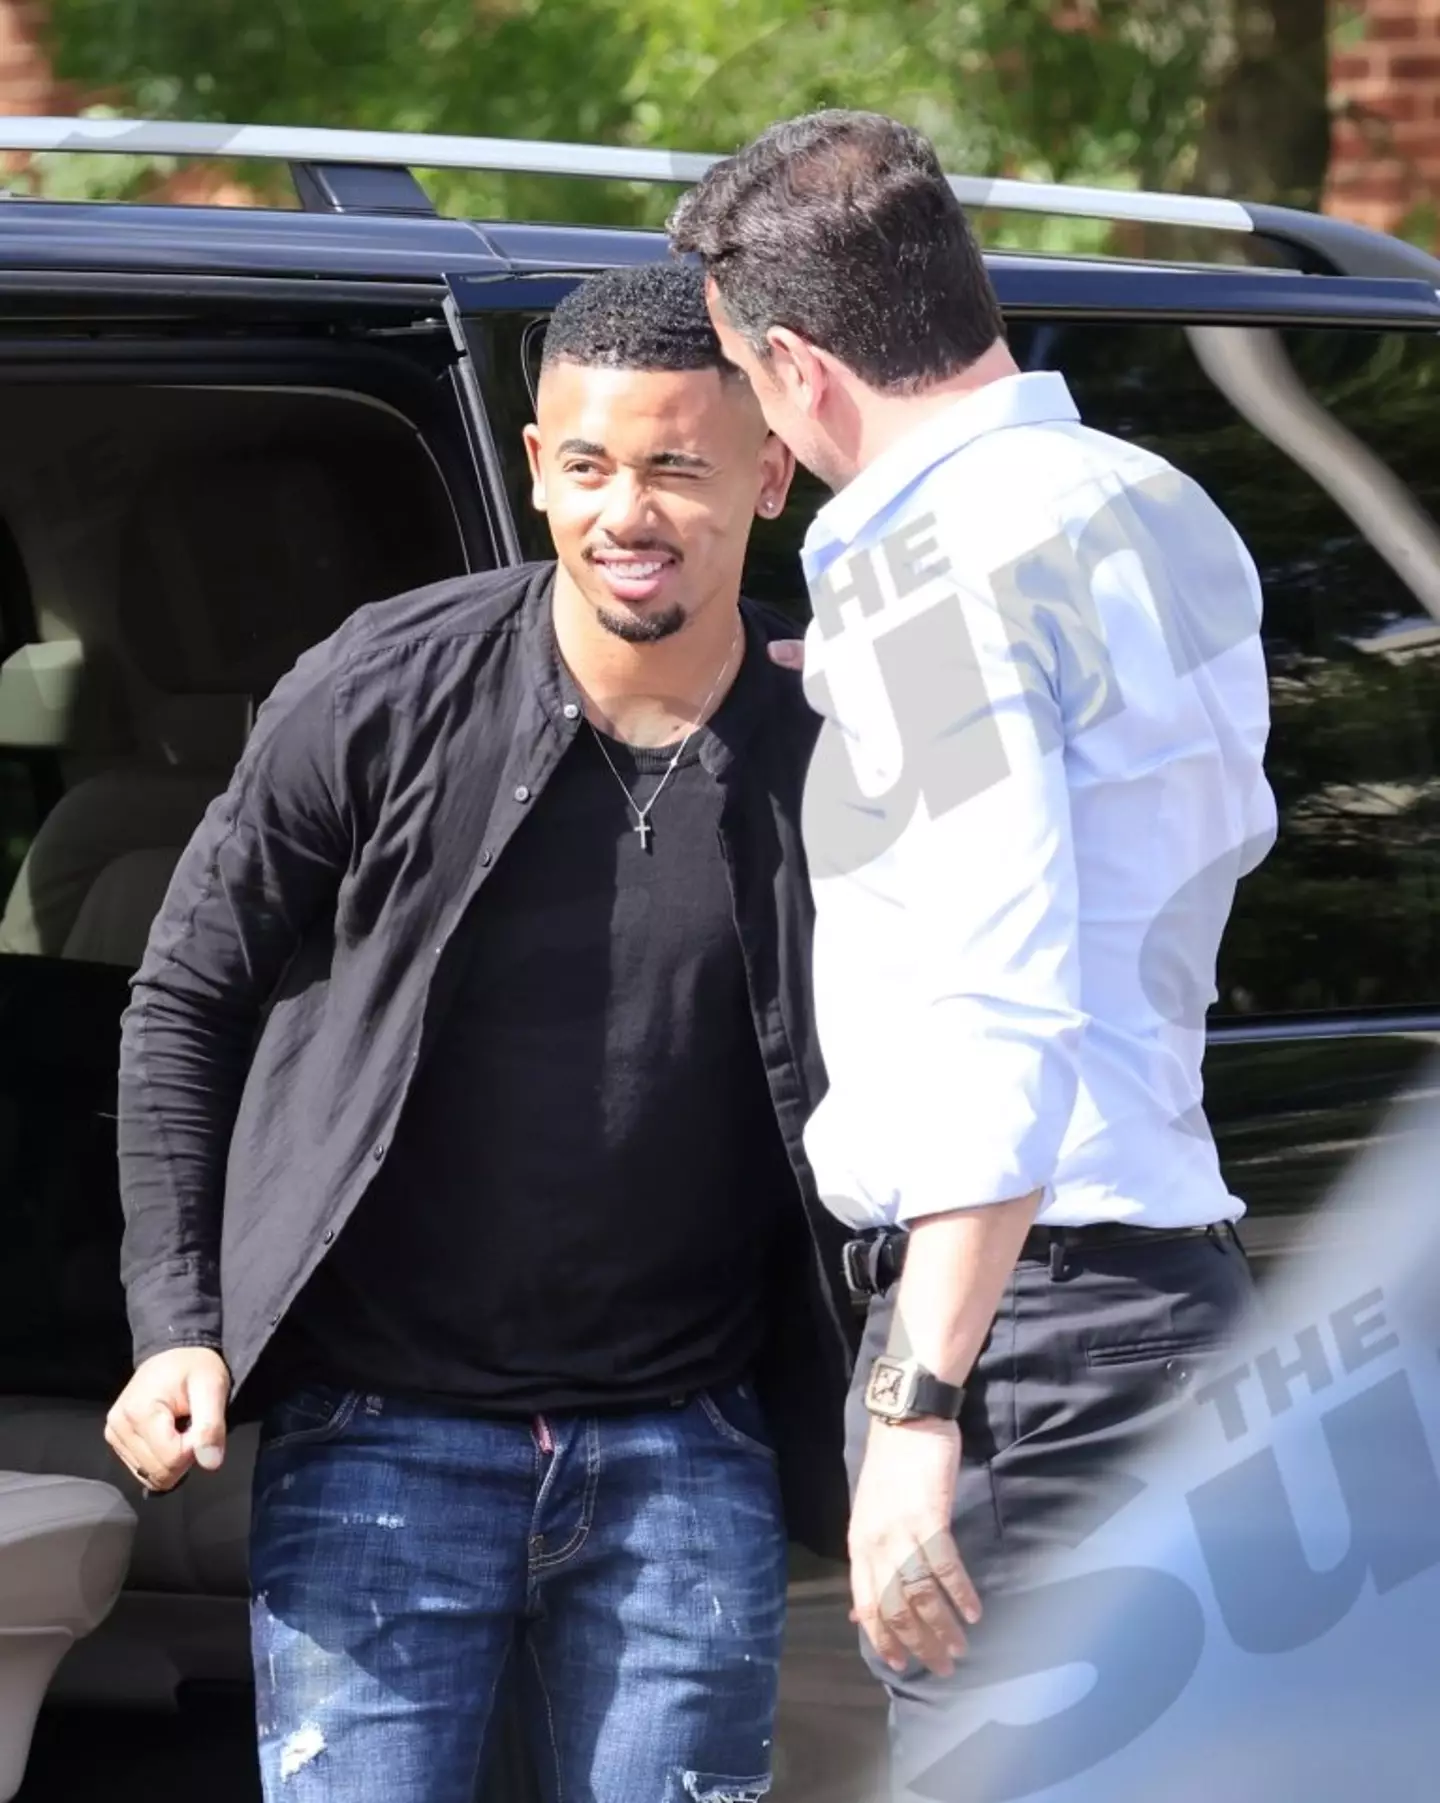 Gabriel Jesus arriving for his Arsenal medical on Monday morning (Image: ISOIMAGES LTD / The Sun)